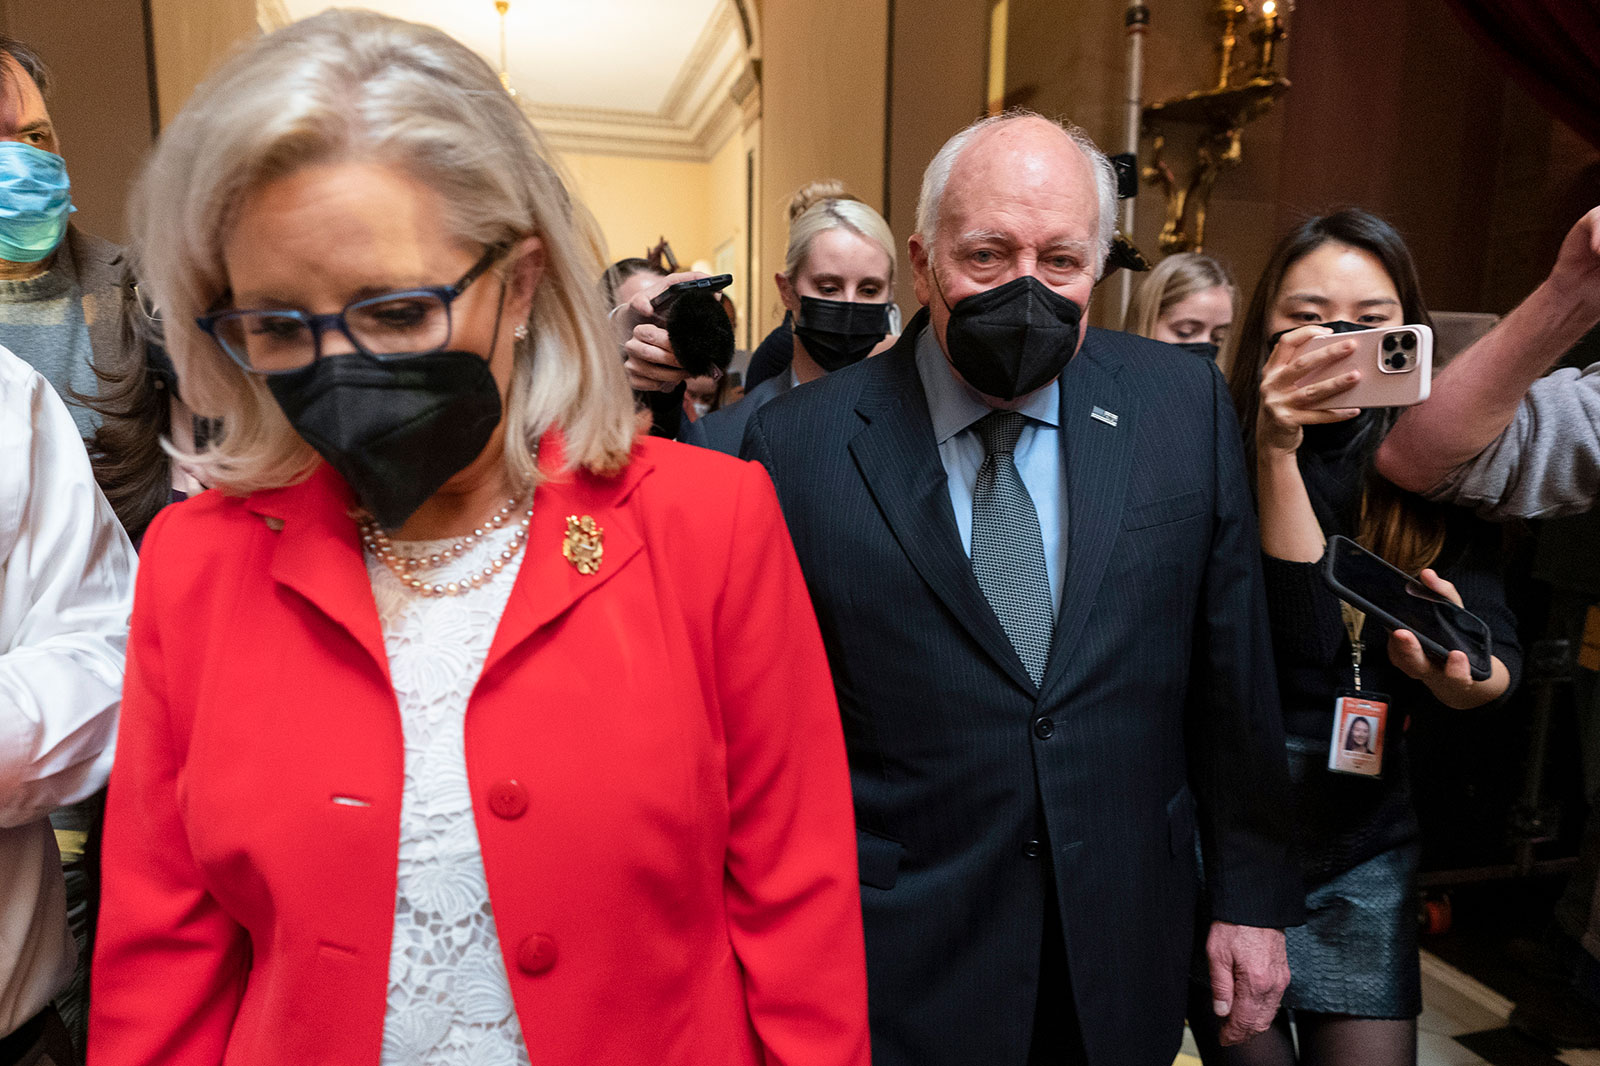 Wyoming Rep. Liz Cheney and former Republican Vice President Dick Cheney walk through the US Capitol on Thursday.